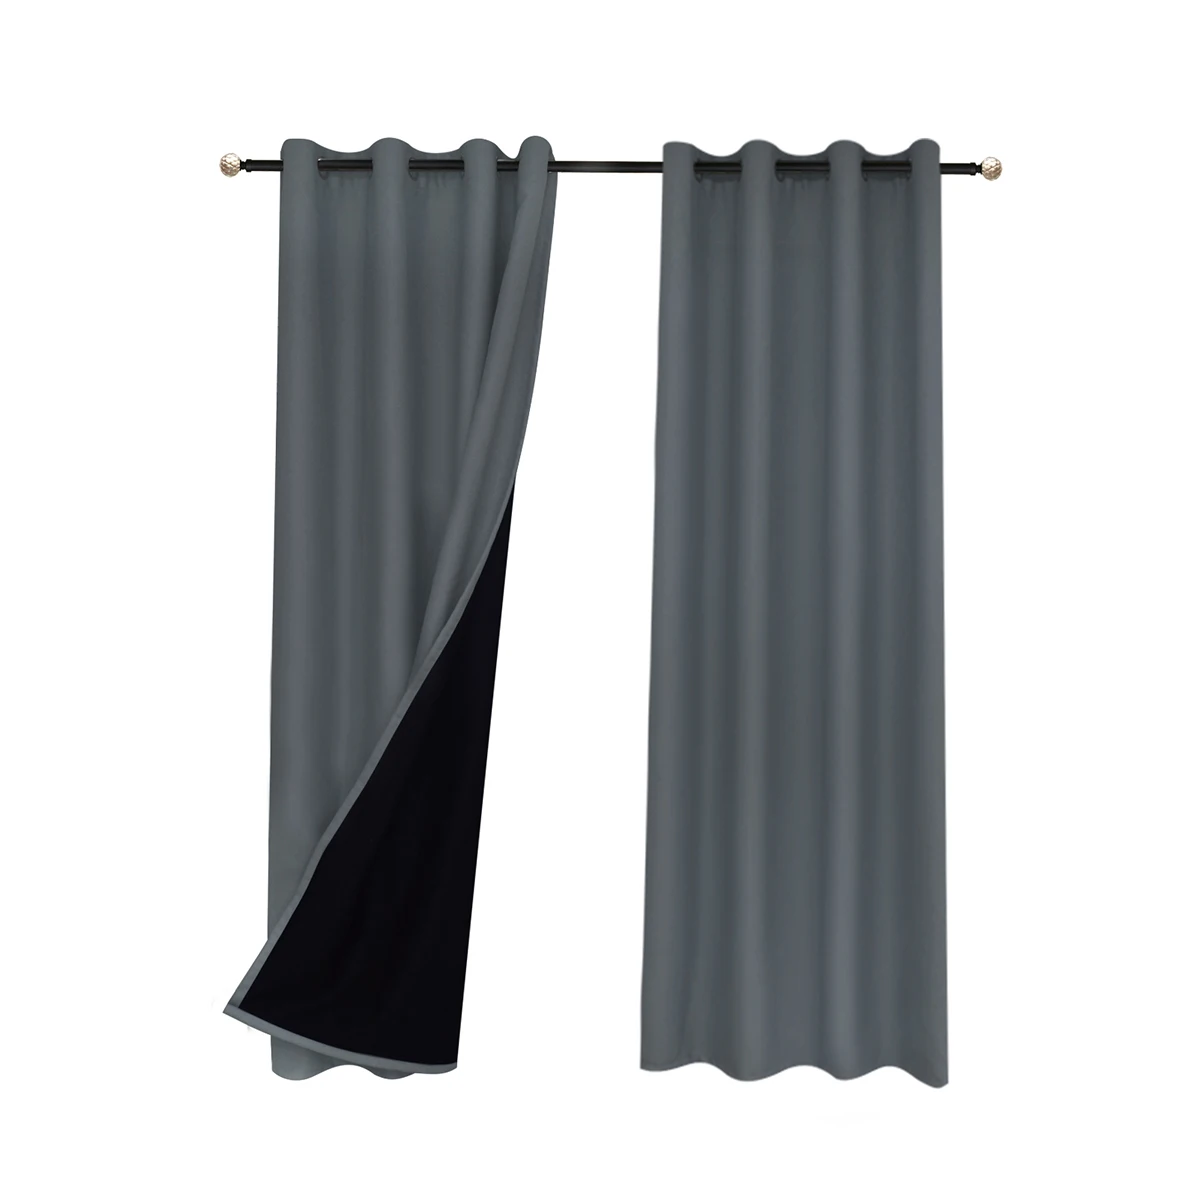 100% Thermal Blackout Curtains For Bedroom Winter Insulating Curtain With Liner Living Room Grommet Drapes Blackout Treatment